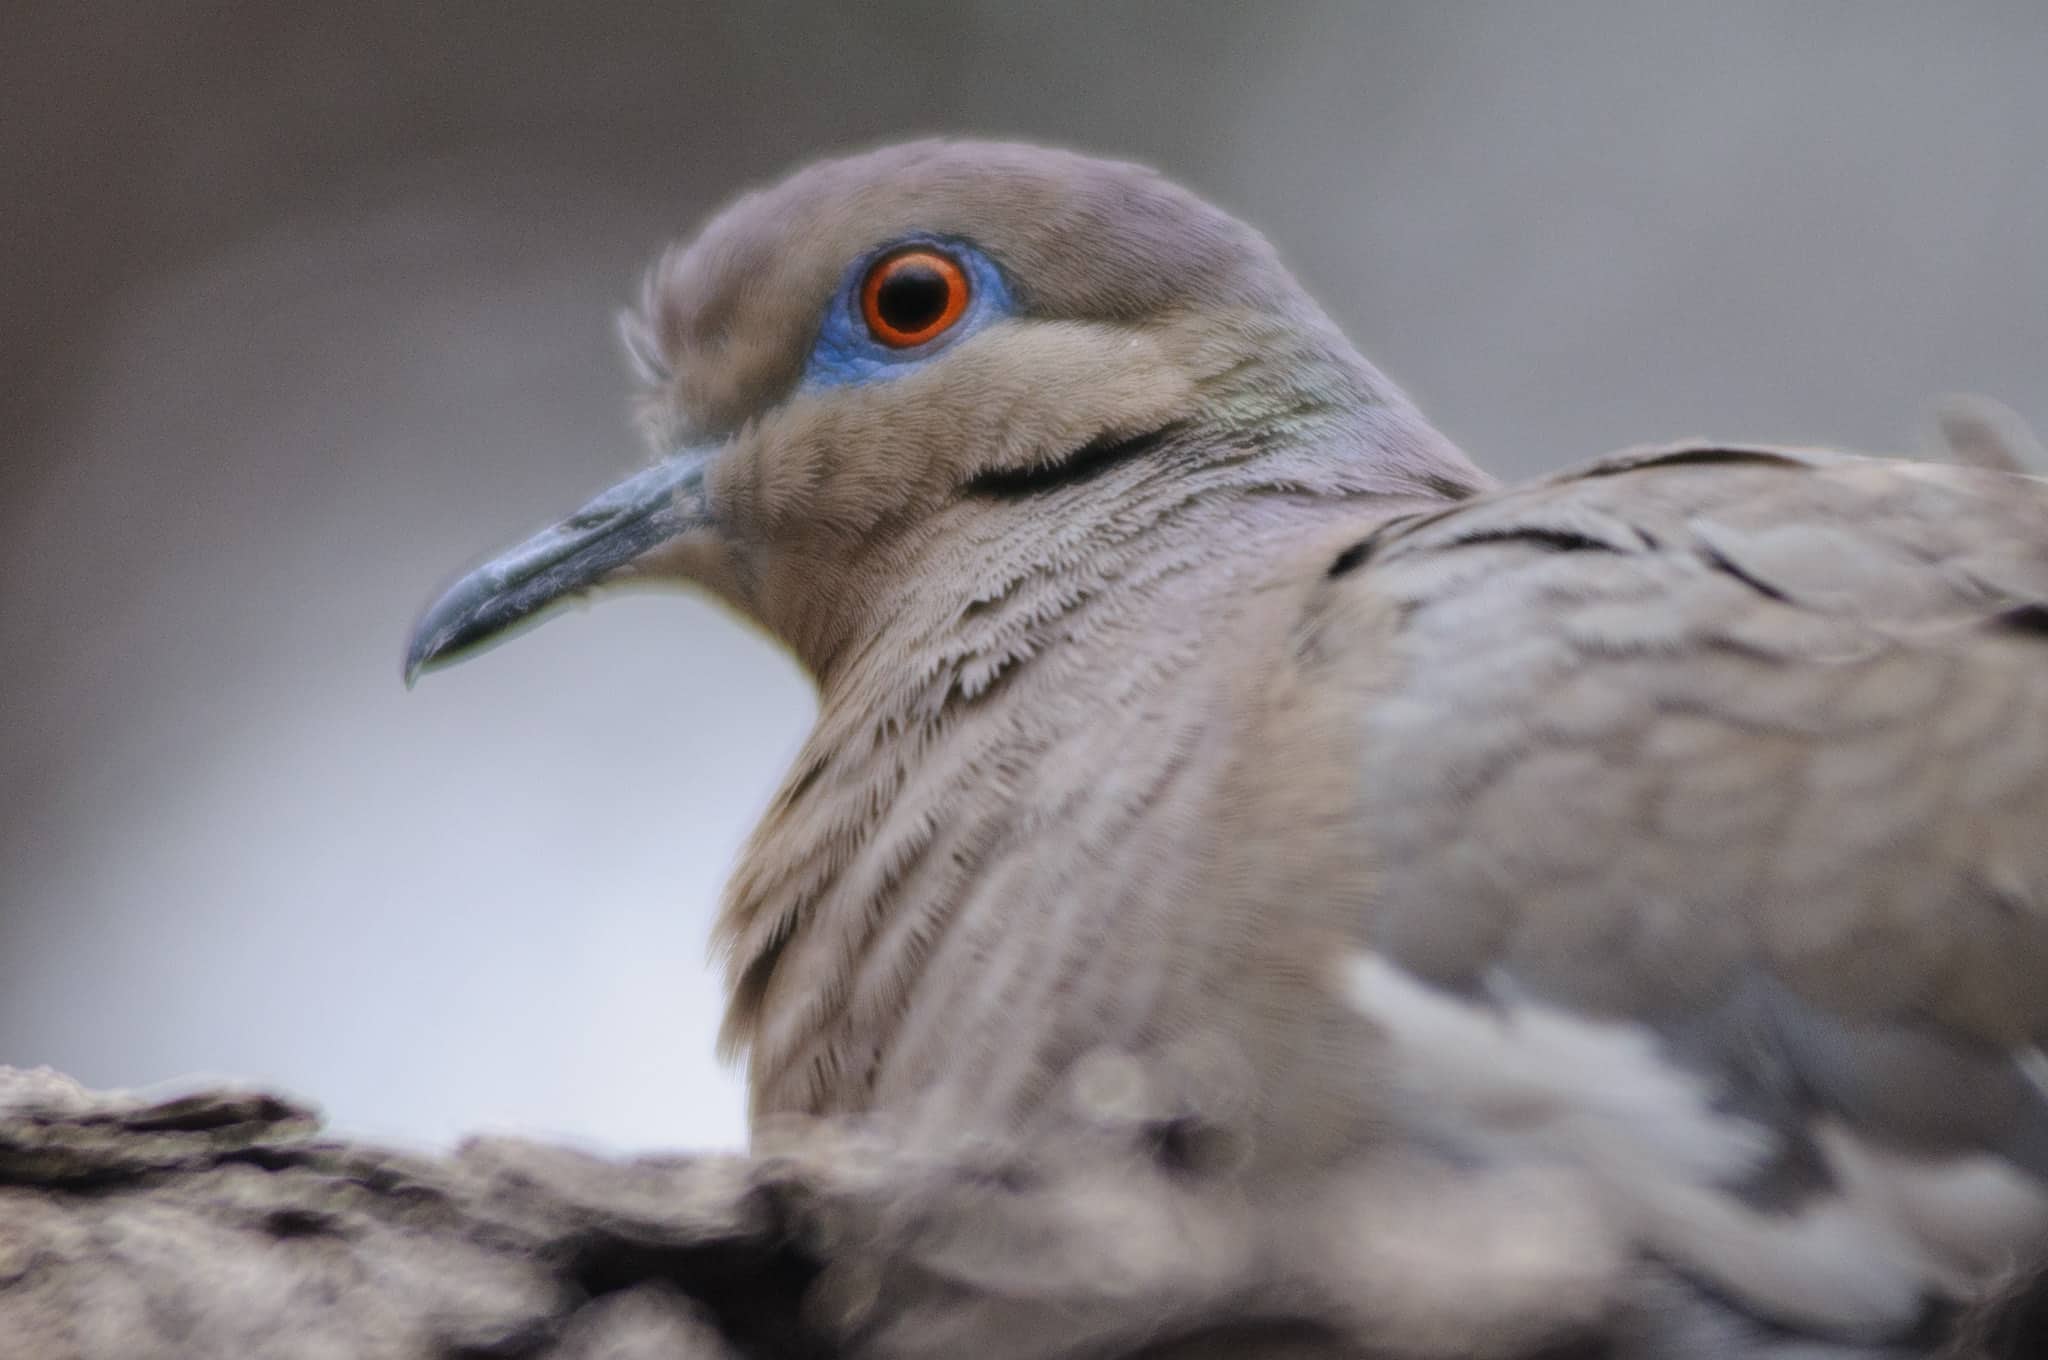 Close-up view of the head of a White-winged dove in the Living Desert Zoo and Gardens in Carlsbad, New Mexico.